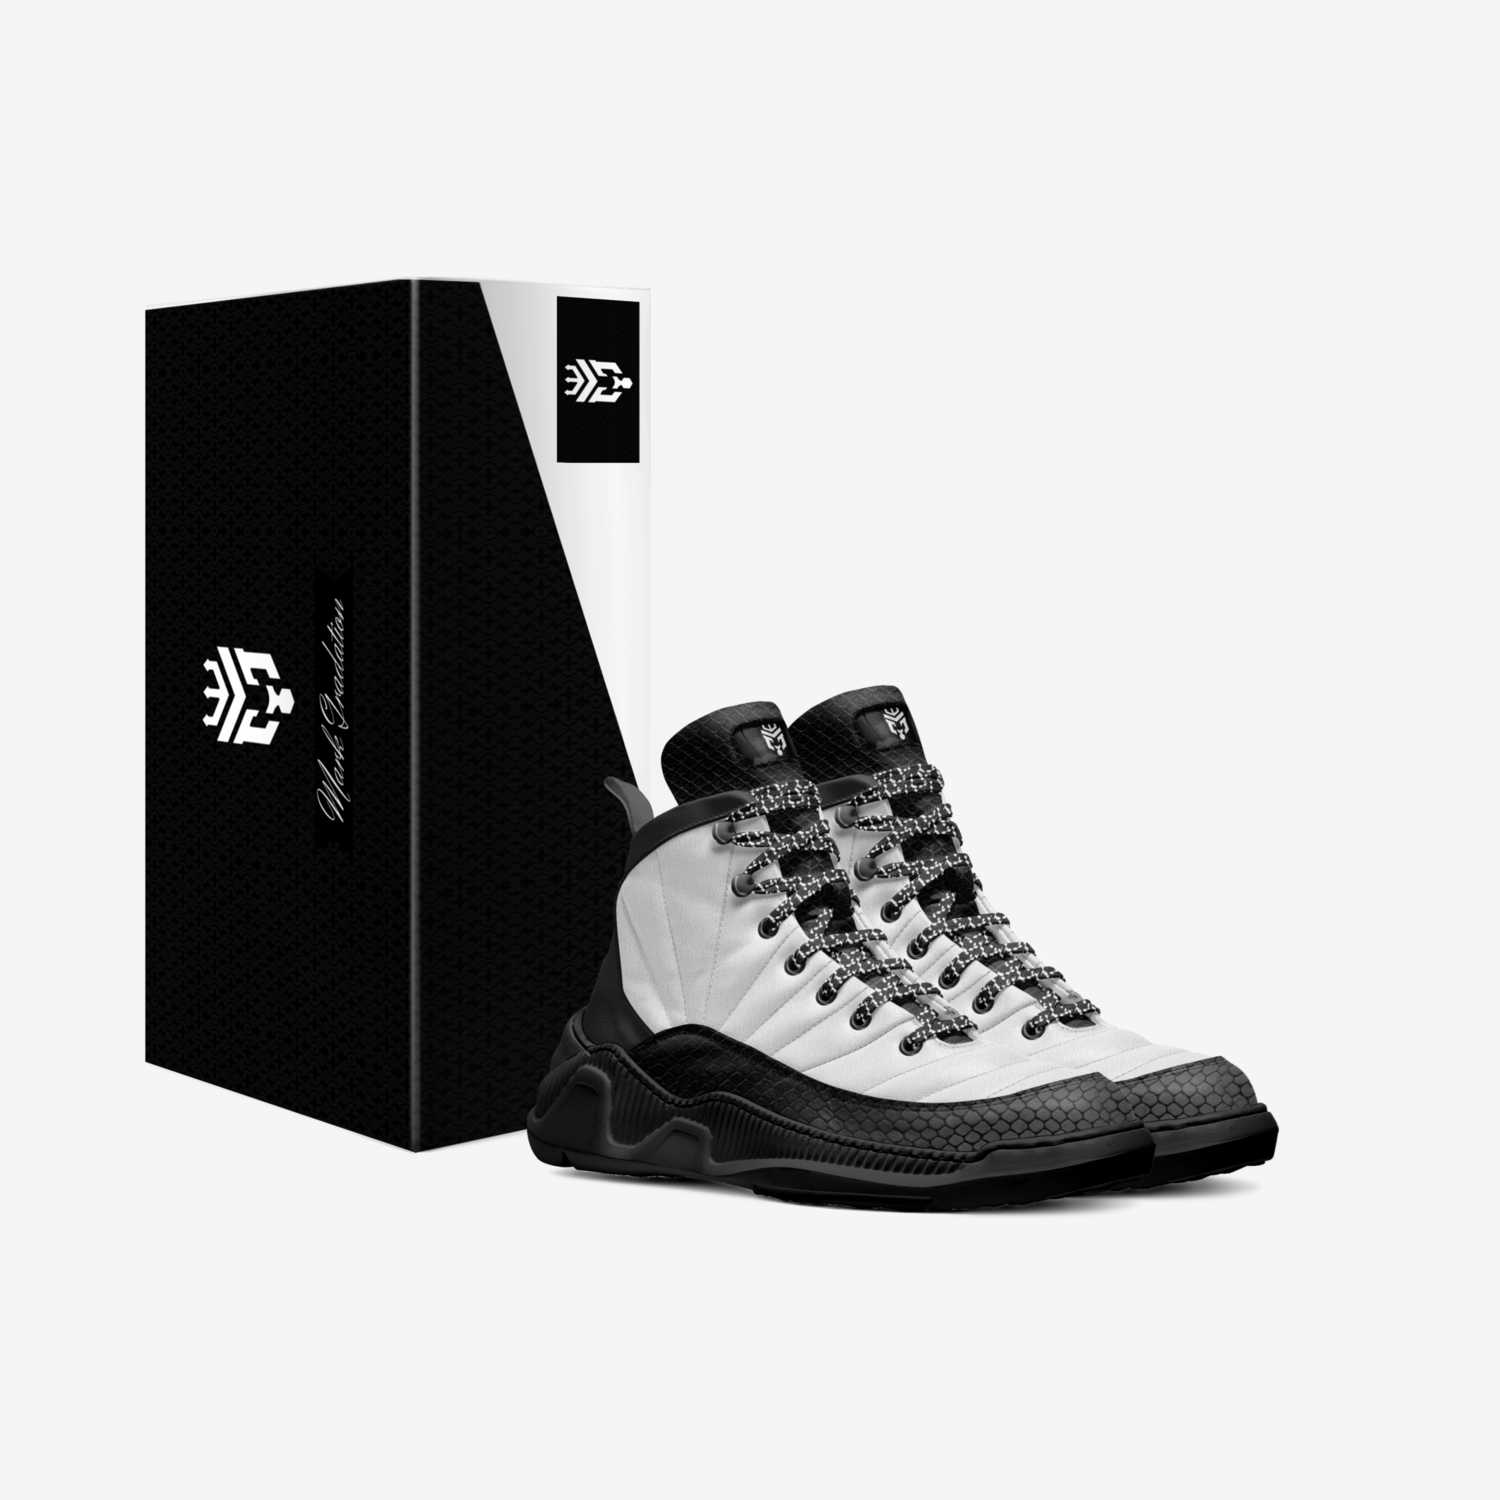 M.G. CATALYST custom made in Italy shoes by Marc-andré Loute | Box view